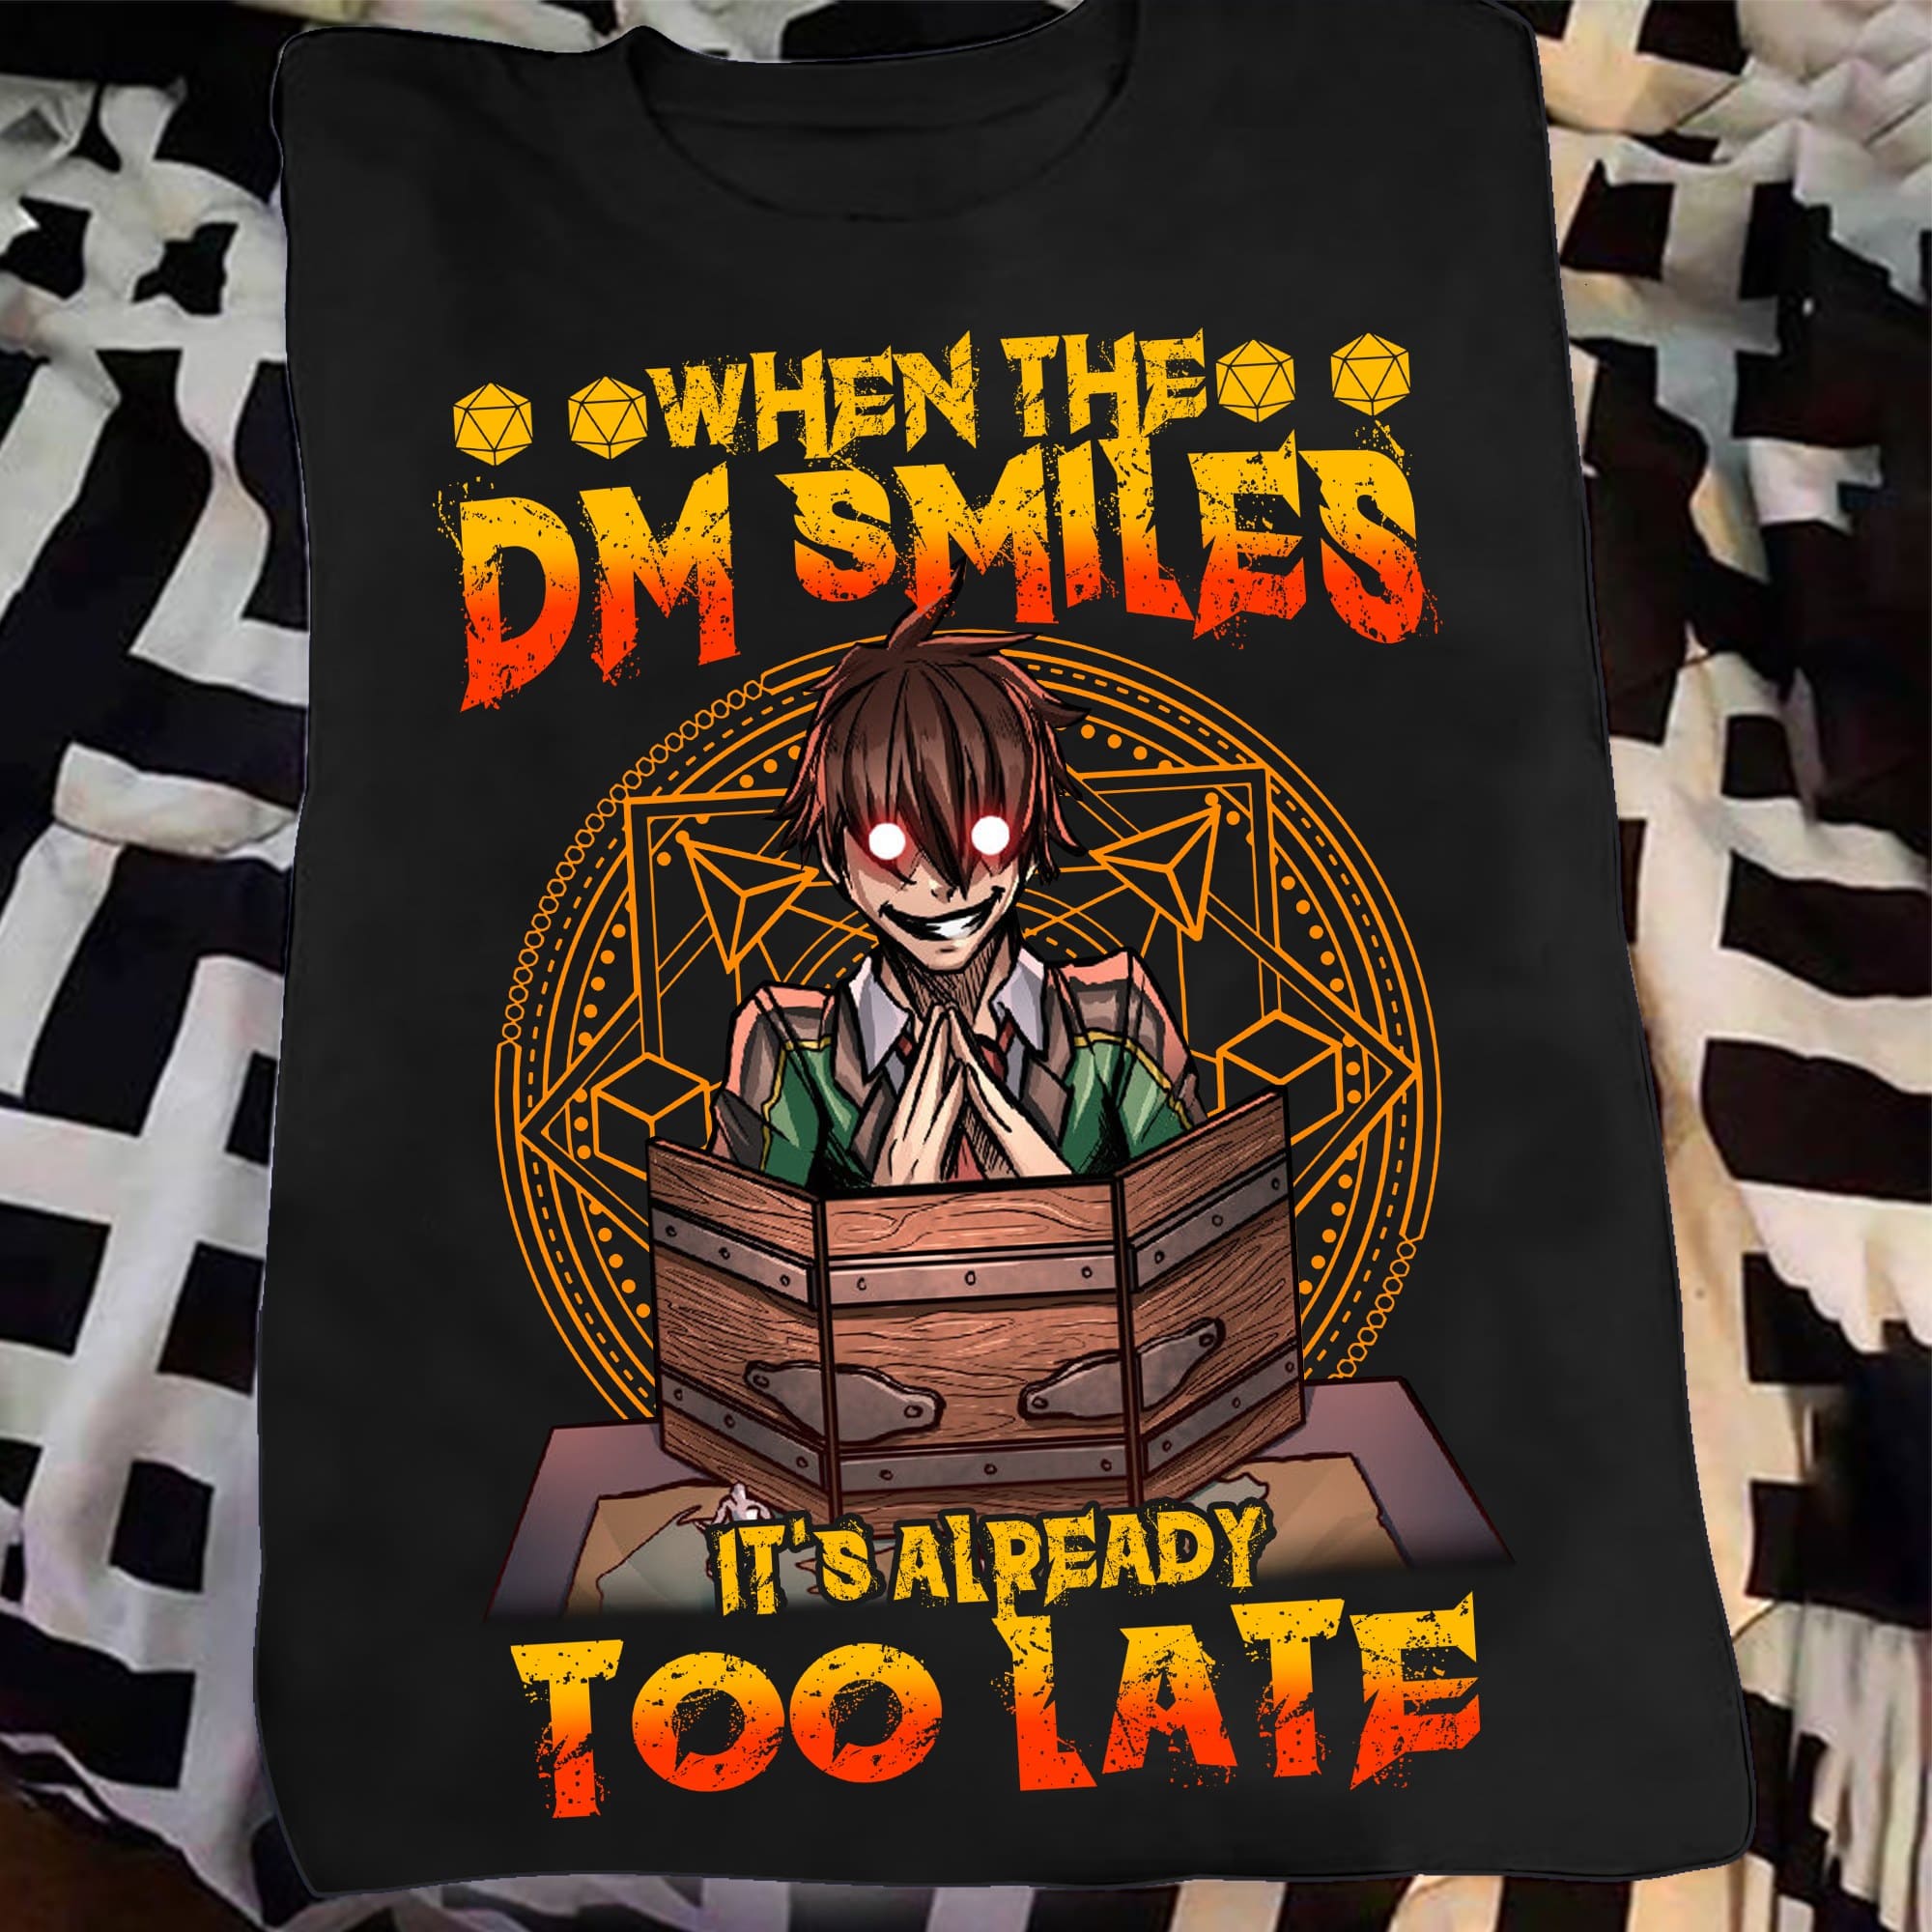 When the DM smiles it's already too late - Dungeons and Dragons